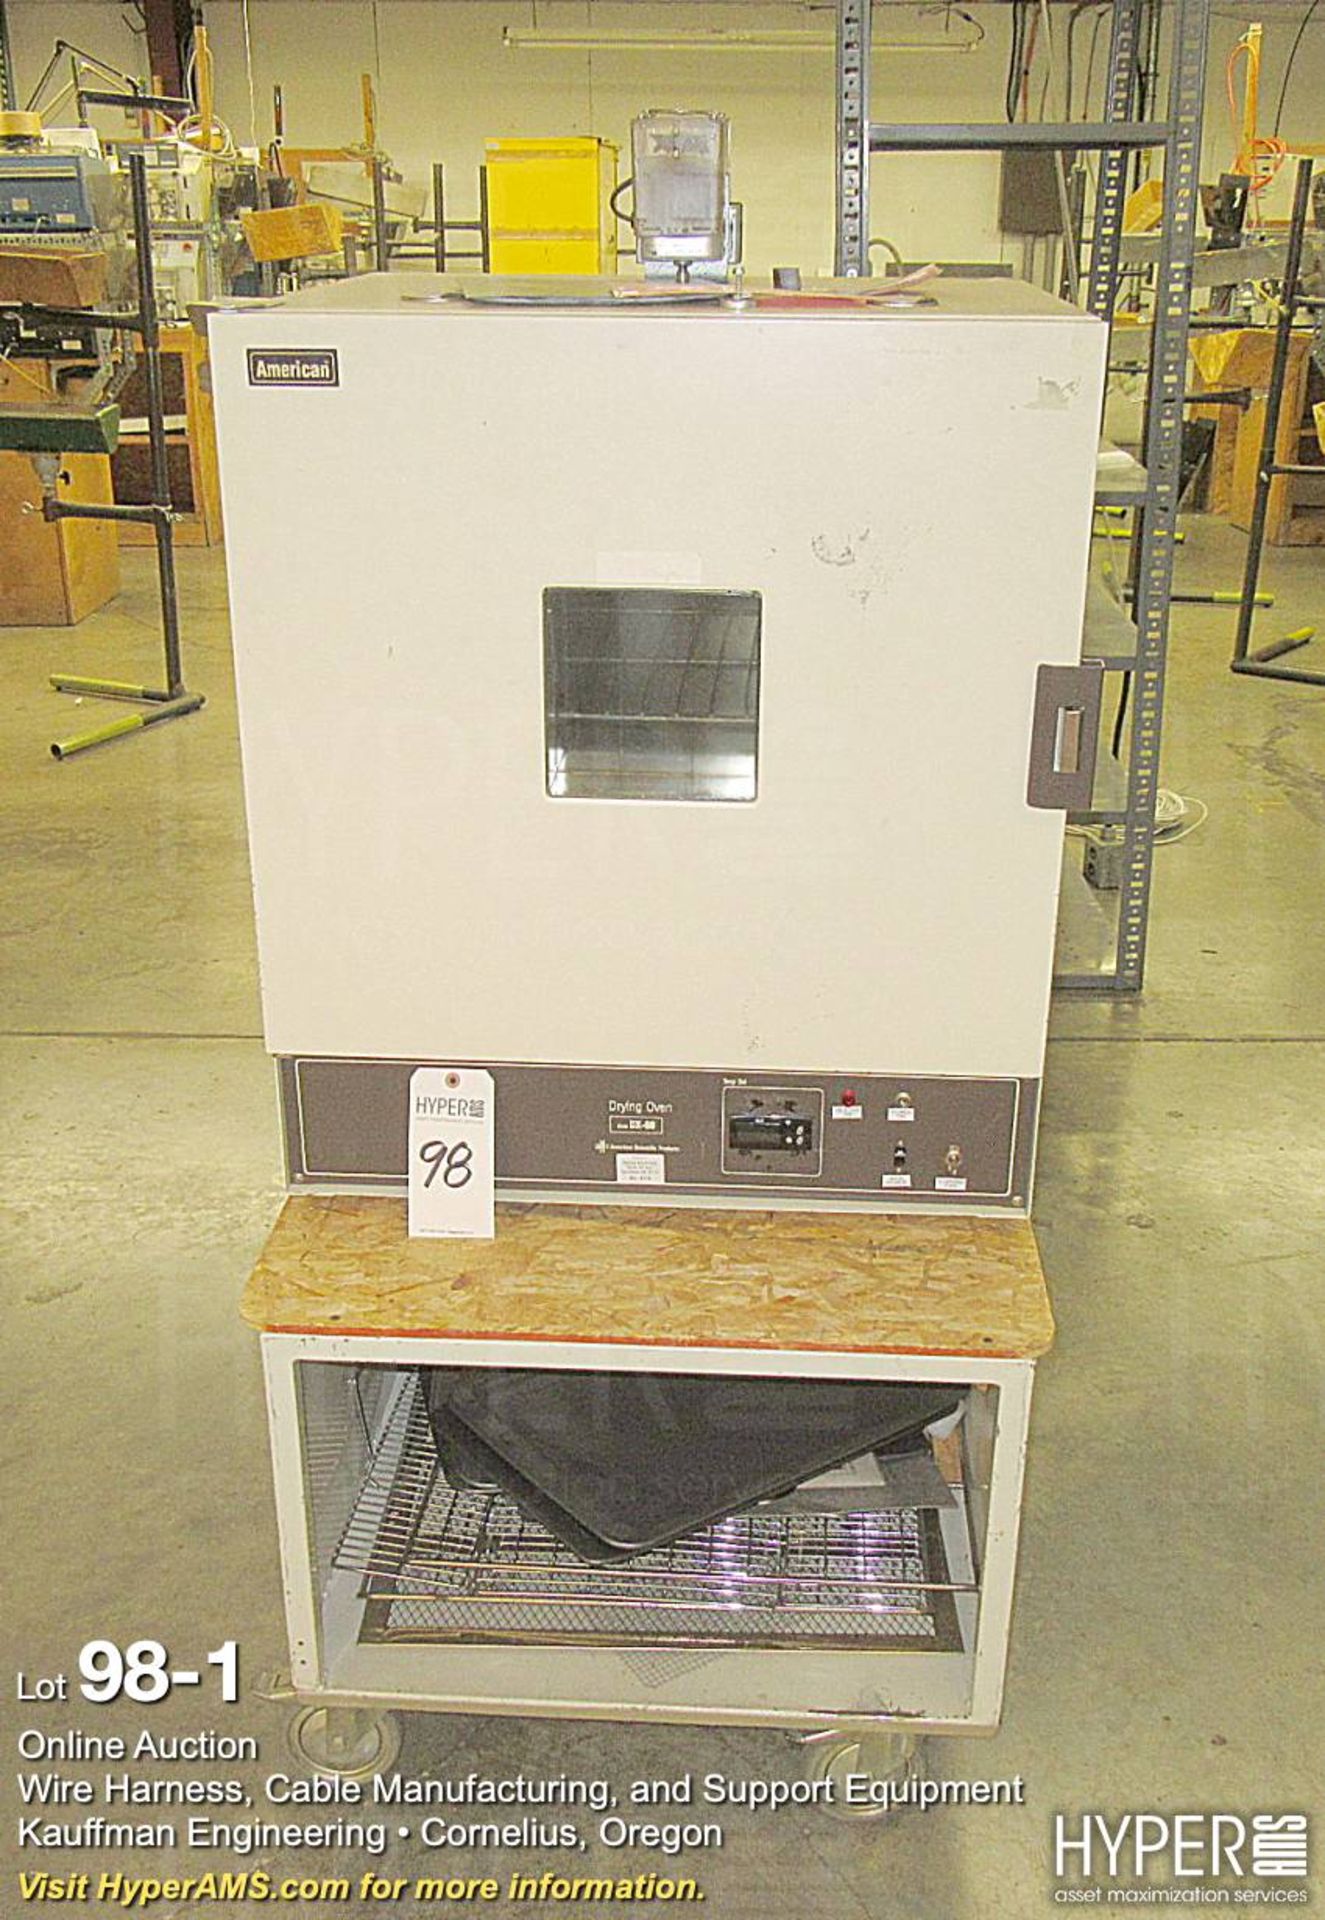 American Scientific DX-68 drying oven